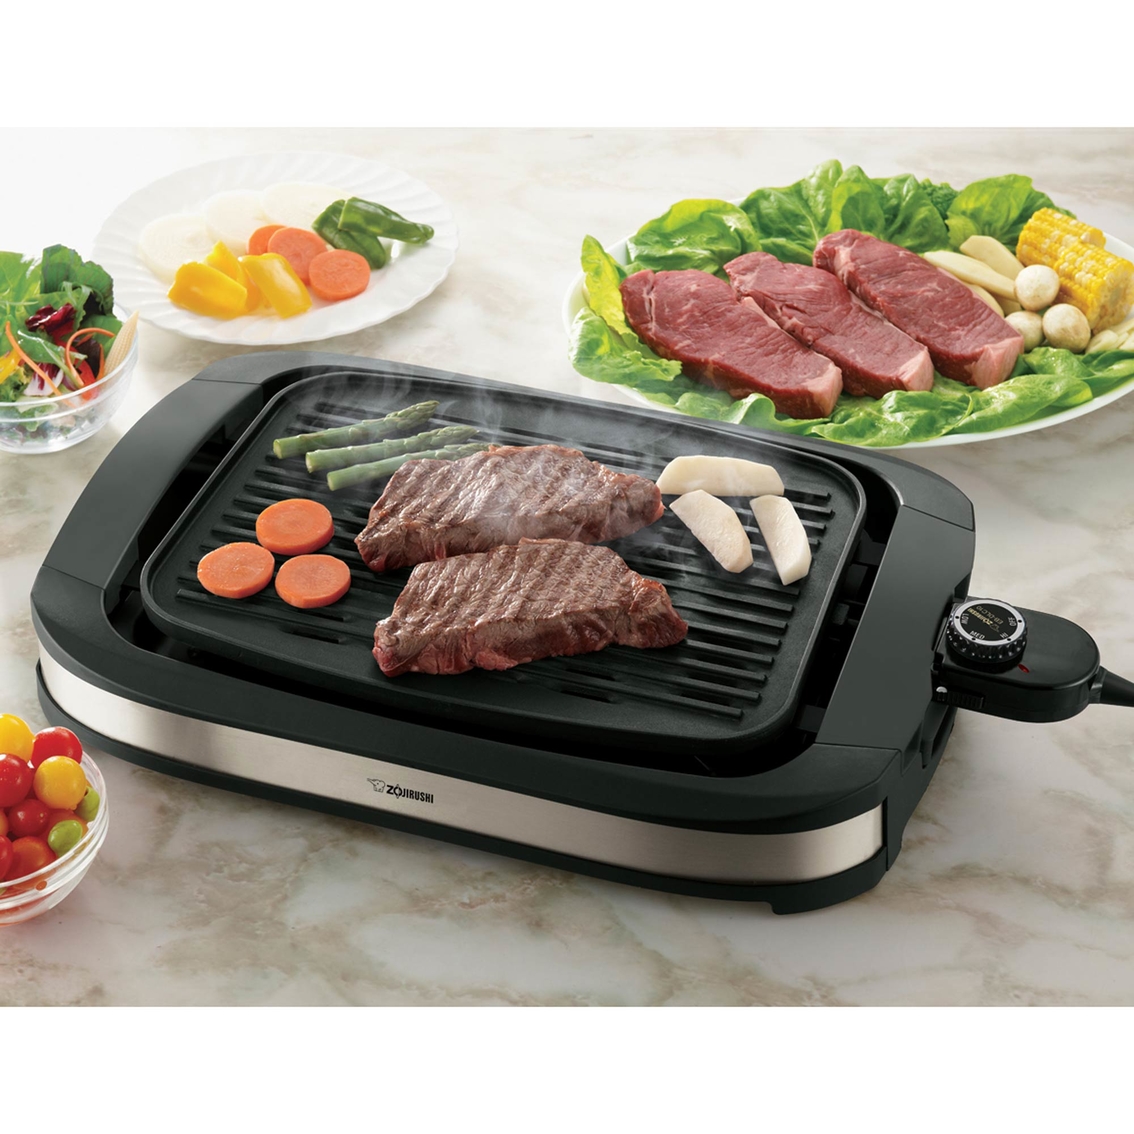 Zojirushi Indoor Electric Grill - Image 2 of 2